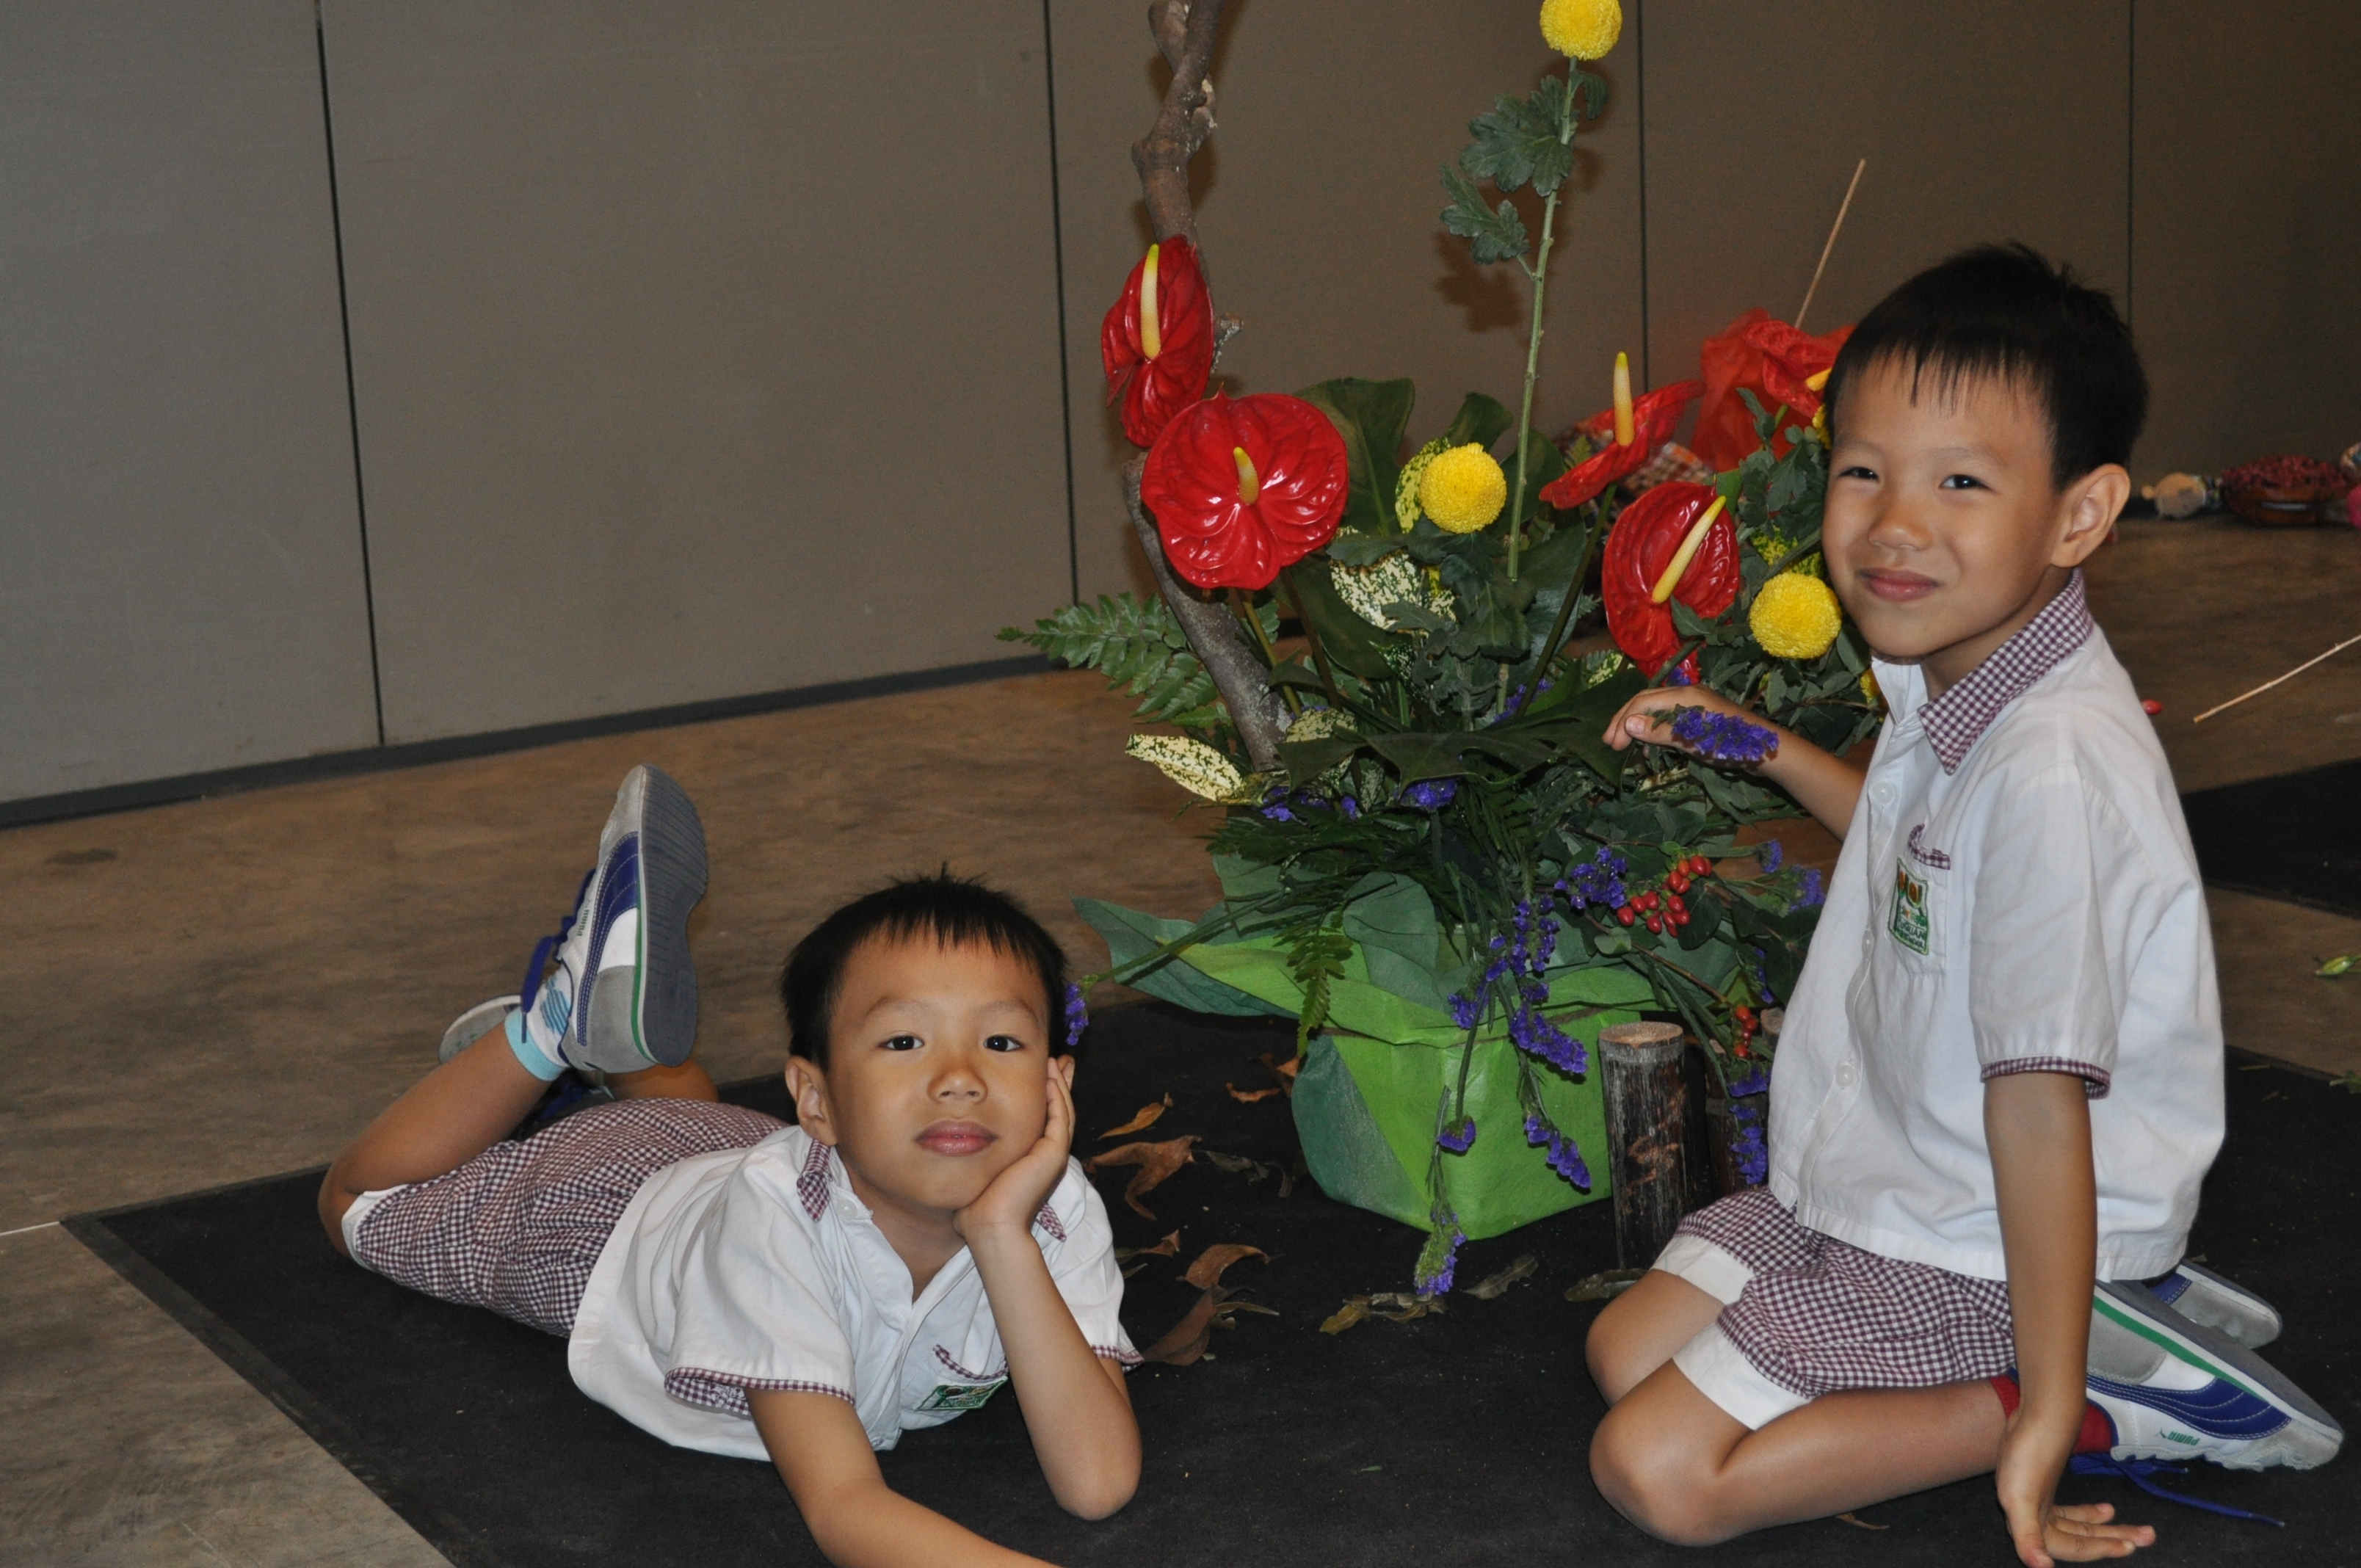 Twin 6-year-old Floral-Arranging Geniuses